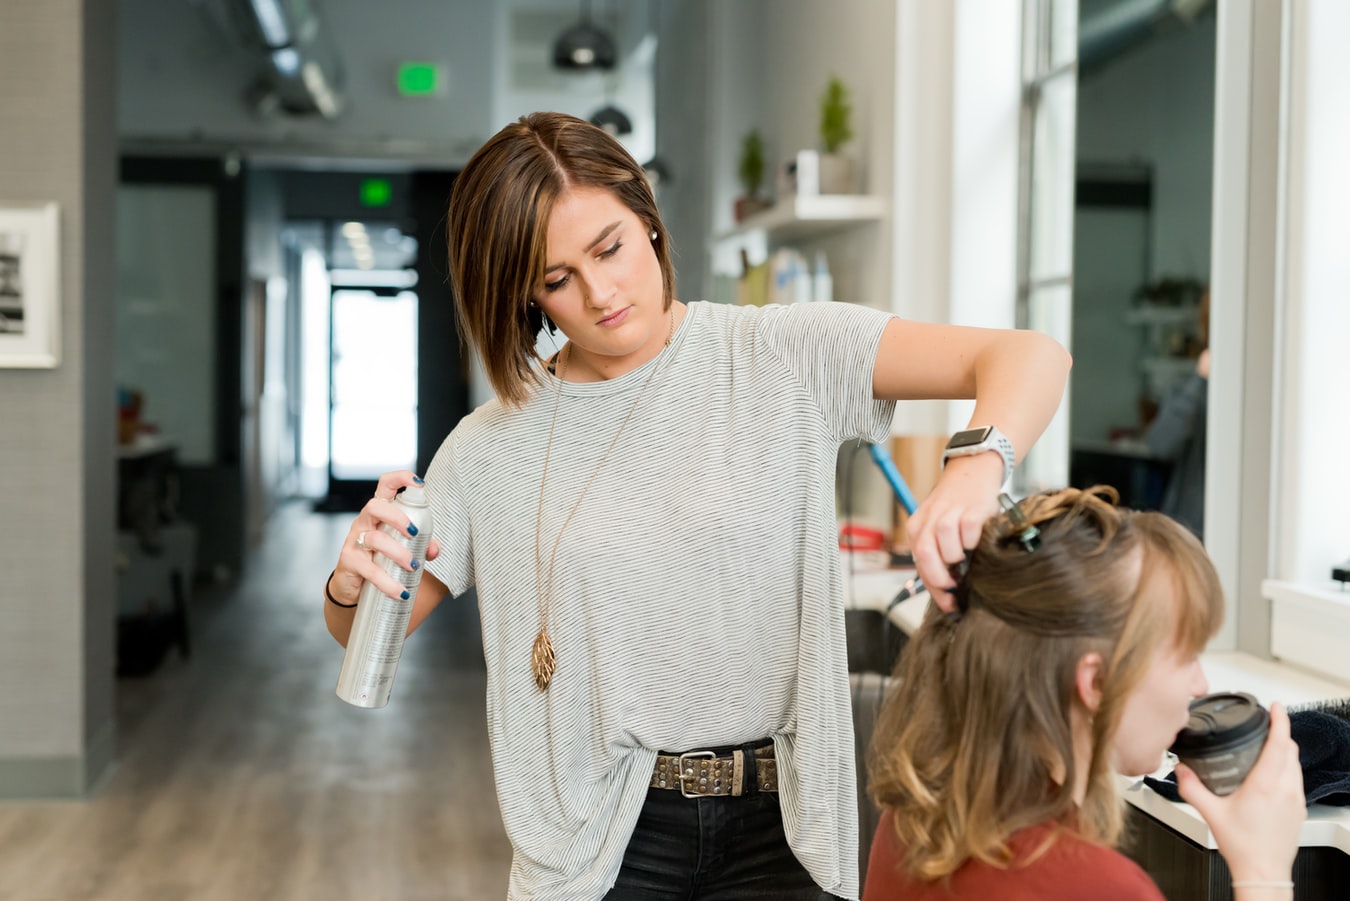 How Much to Tip Hairdresser On $200 | Guide - Beezzly